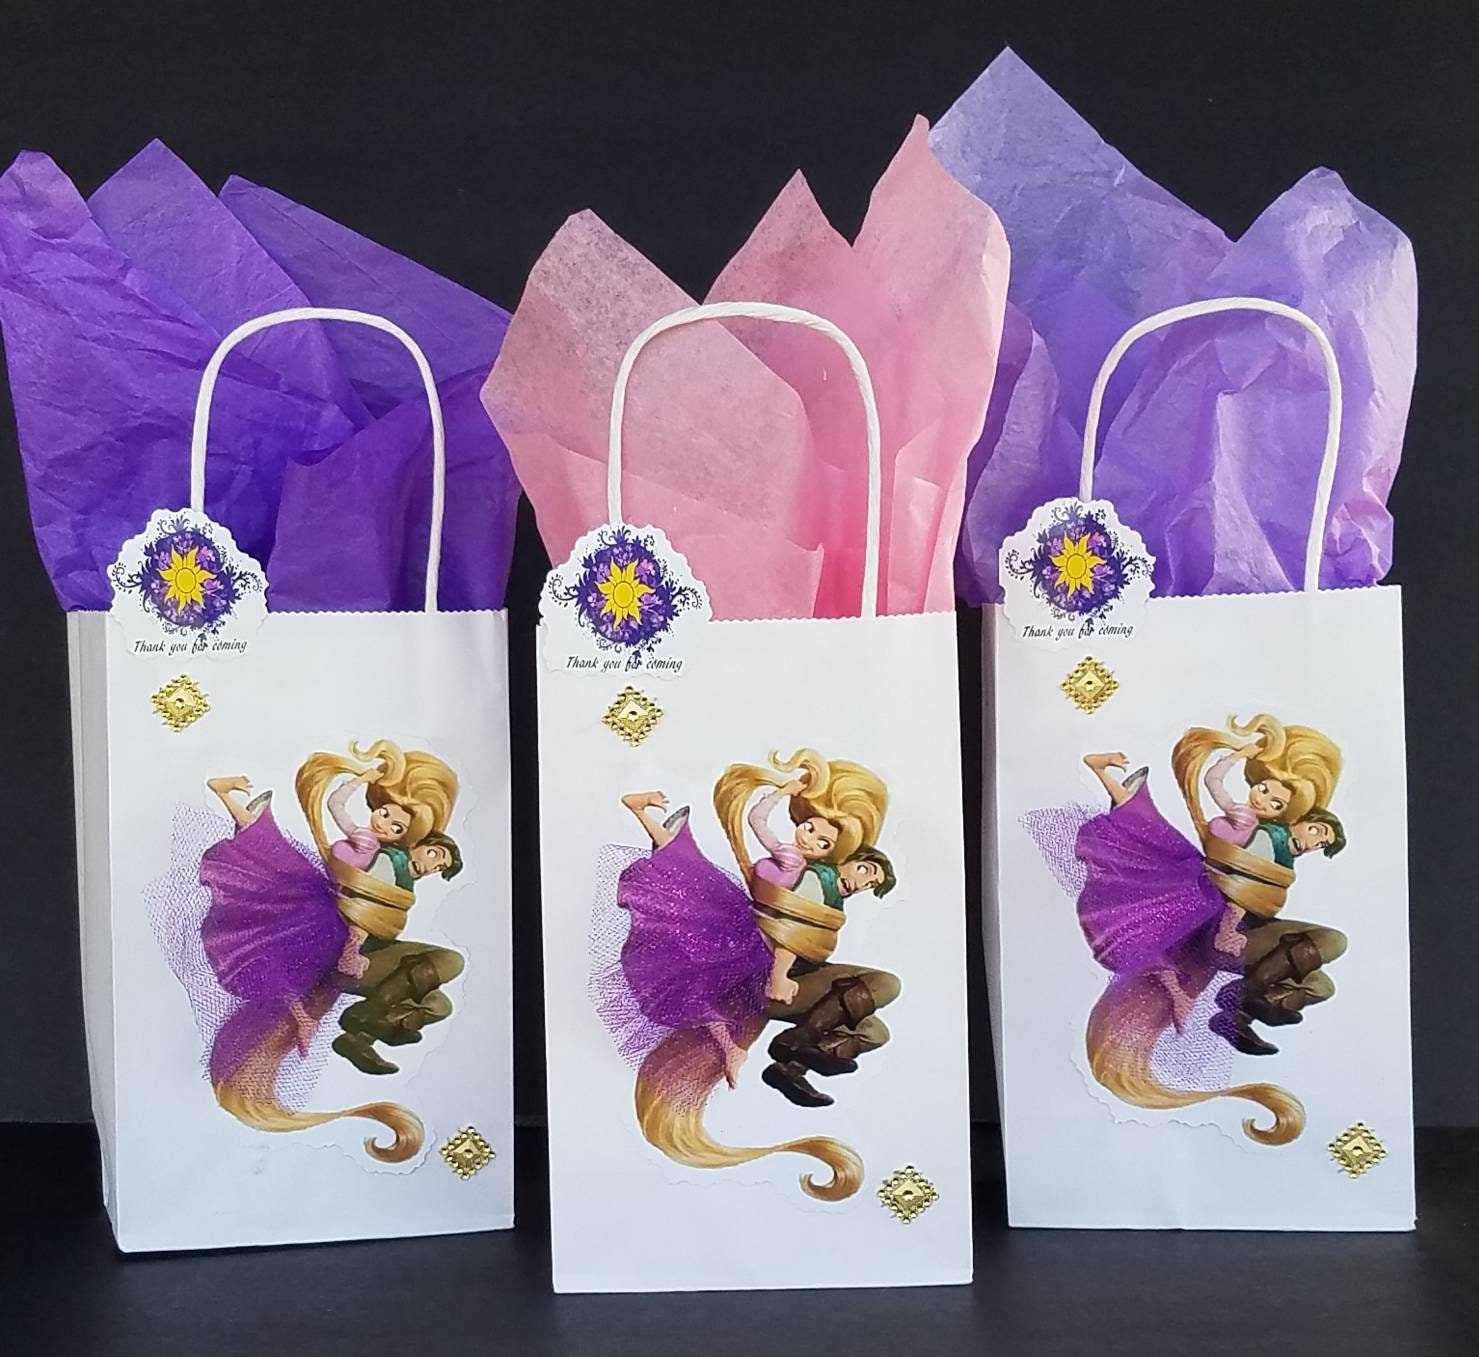 Frozen Birthday Party Supplies, 16pcs Frozen Party Favor Goody Bags for Frozen Theme Party Supplies Decorations